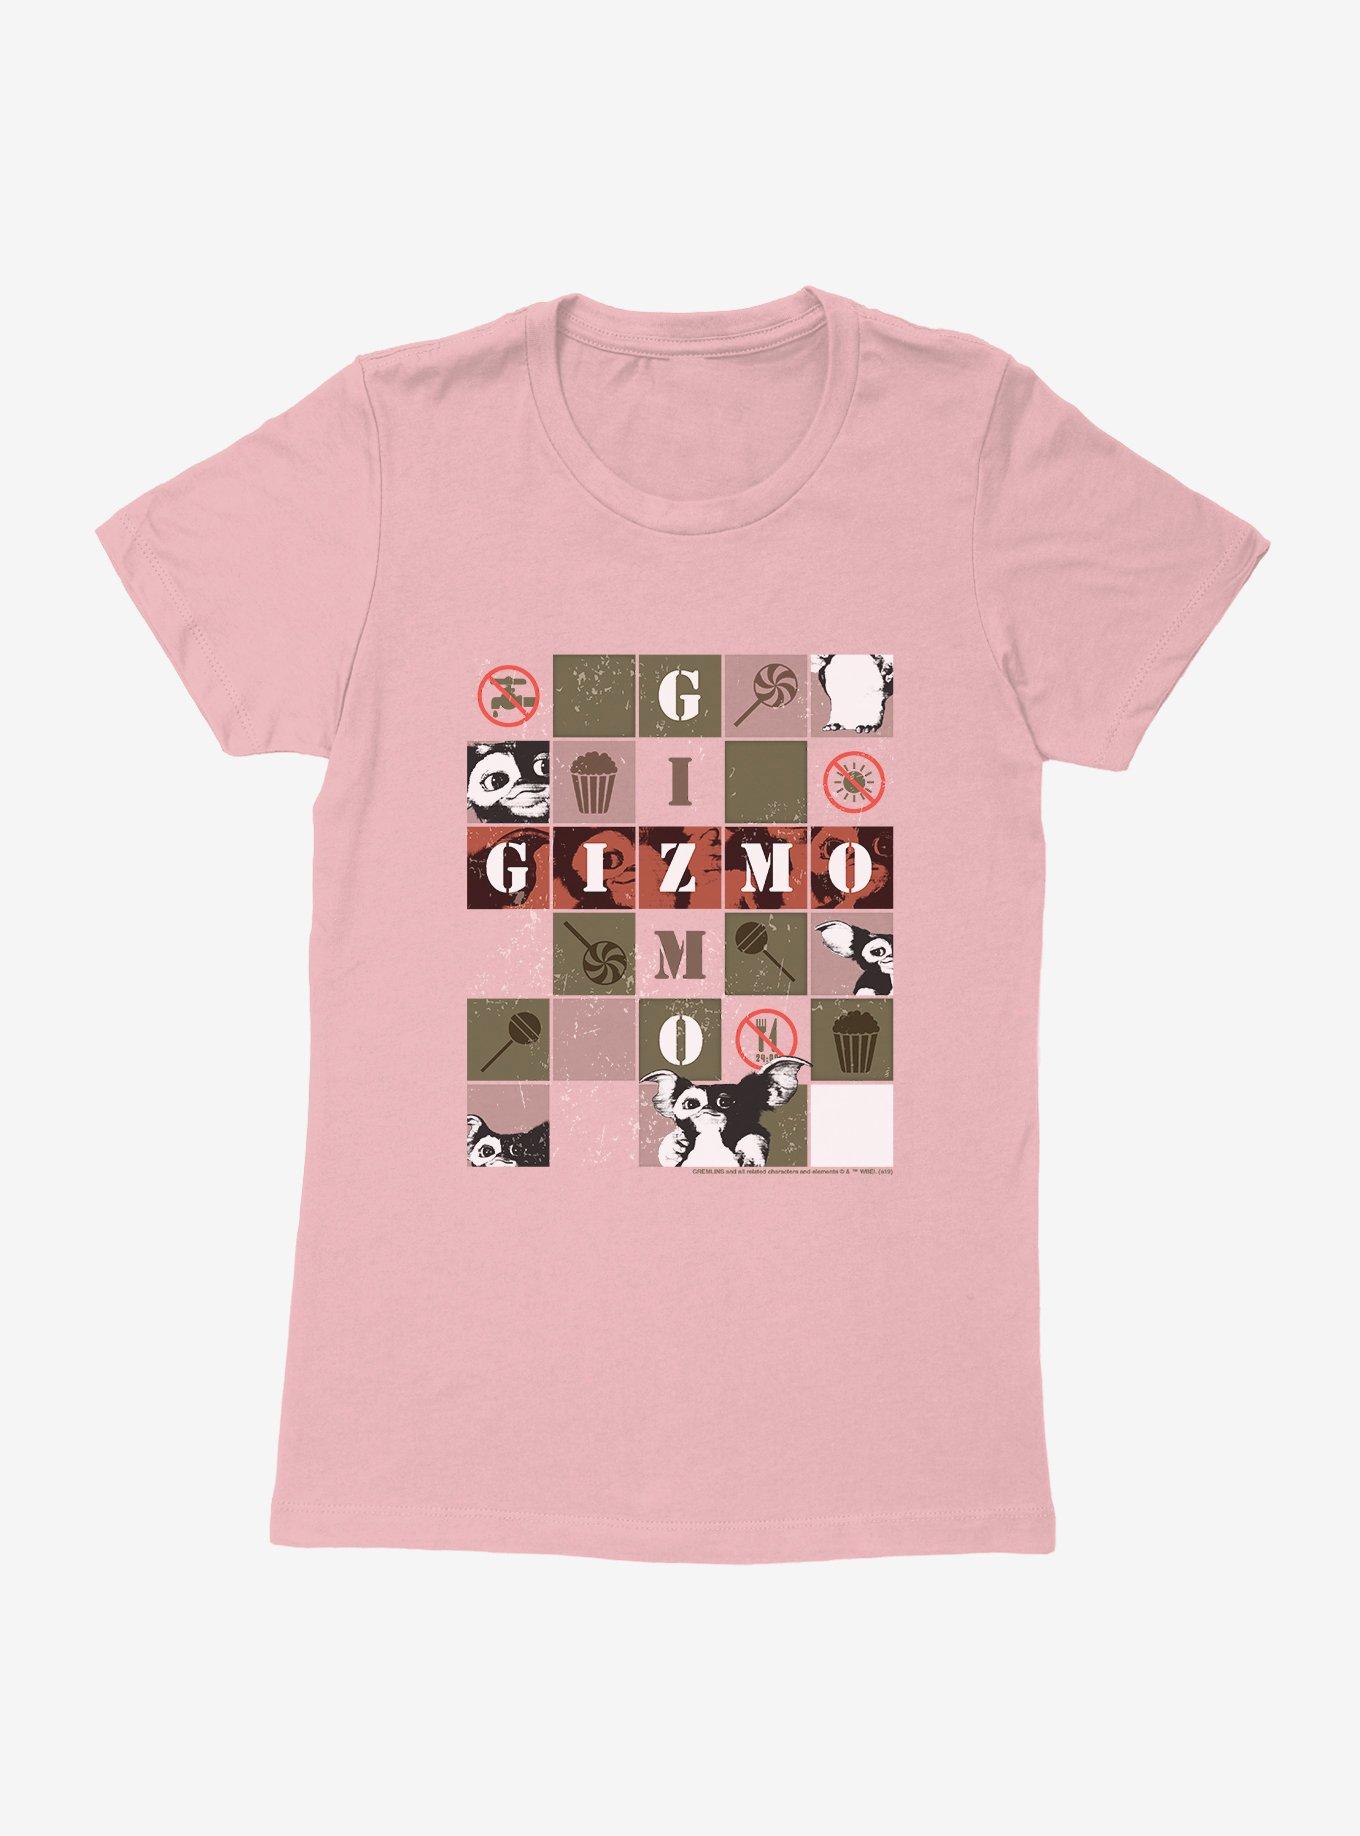 Gremlins Gizmo Boxed Collage Womens T-Shirt, LIGHT PINK, hi-res